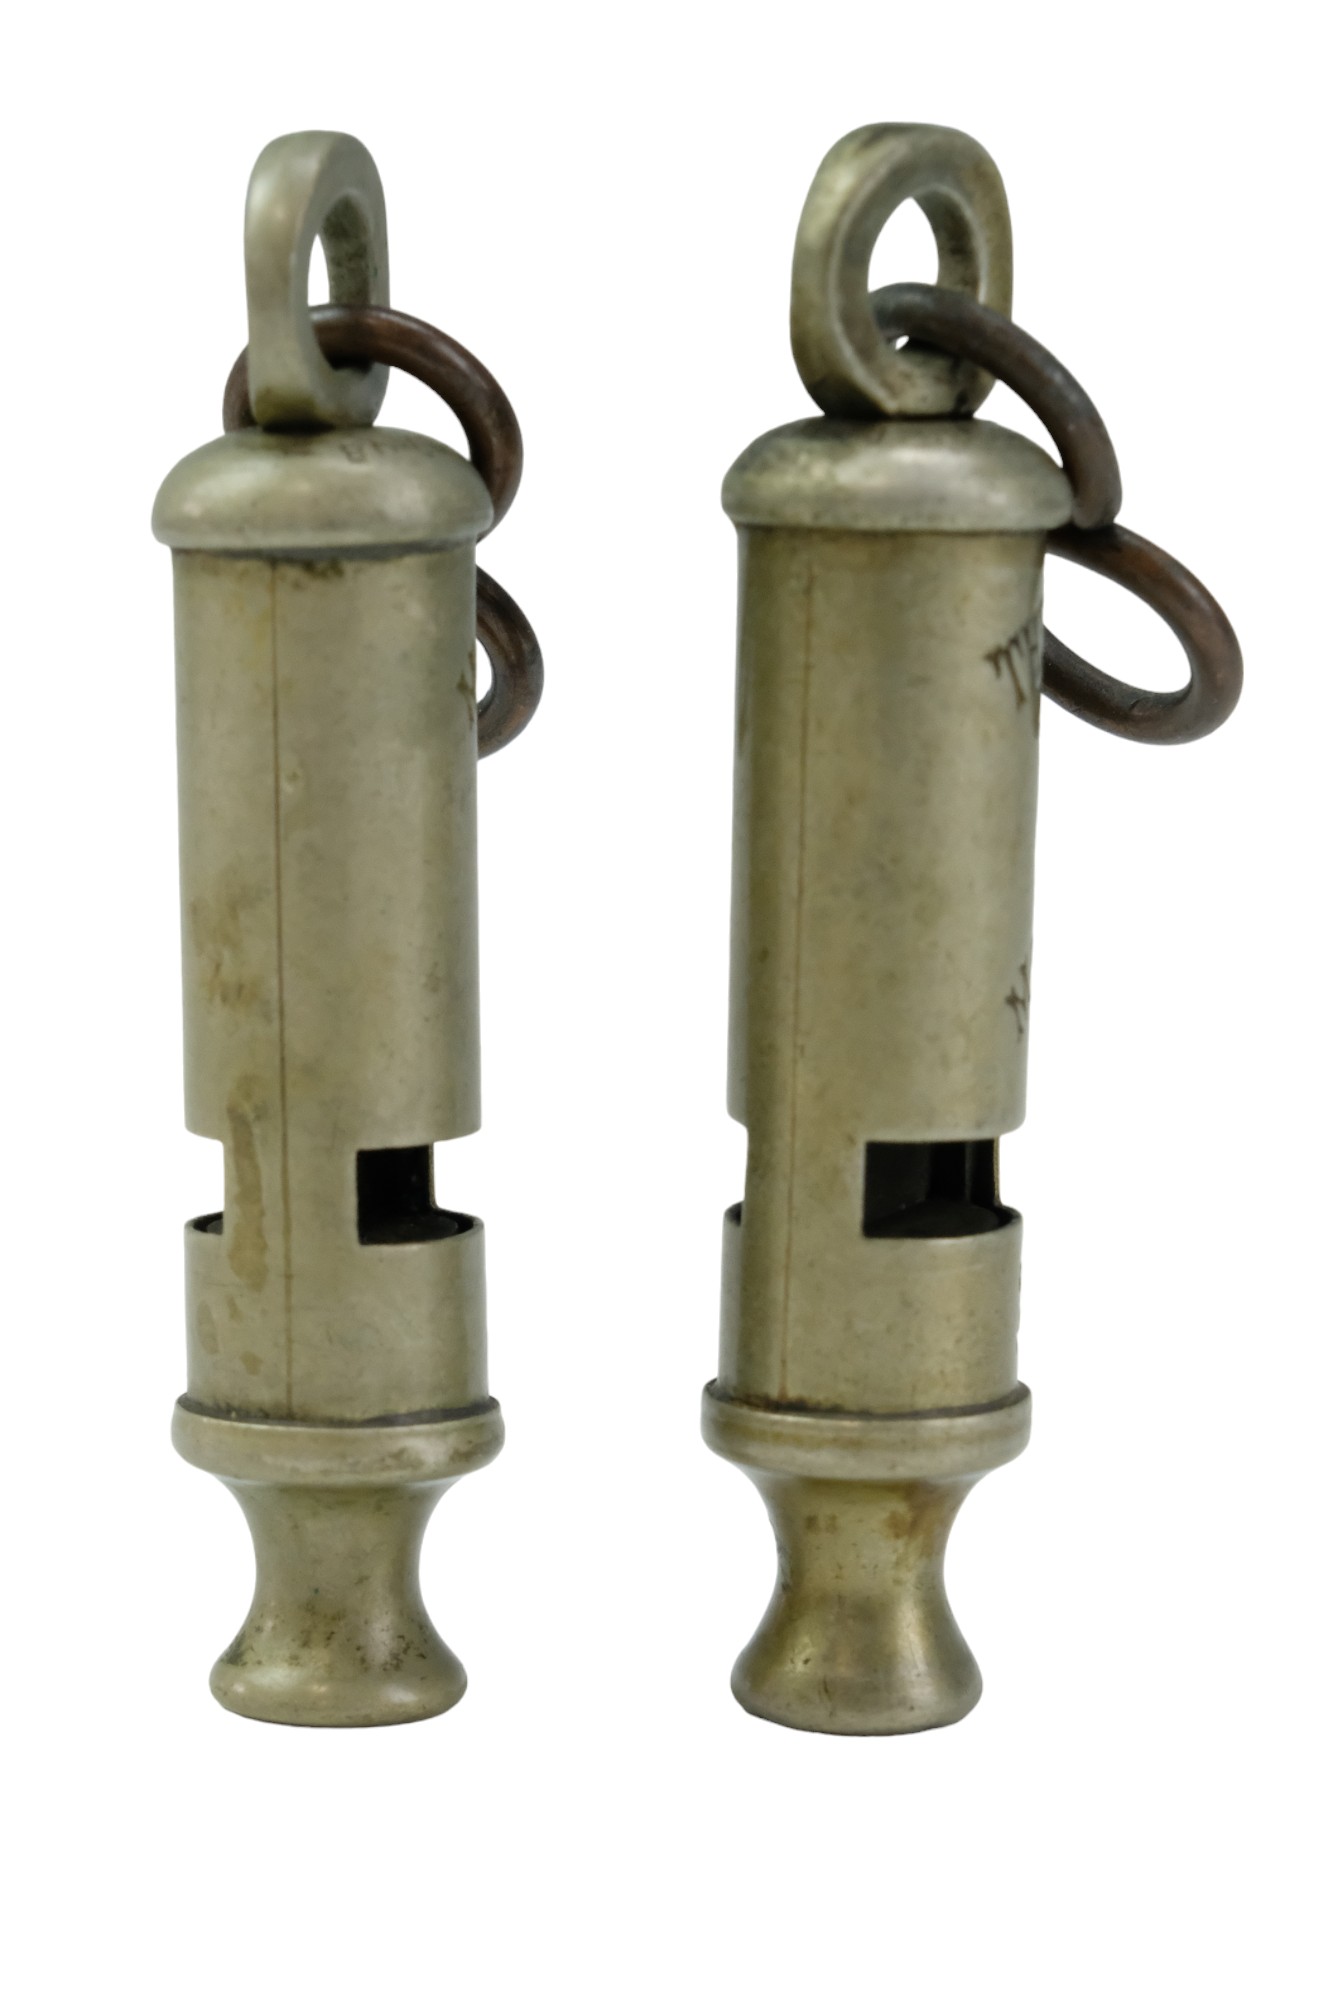 Two early 20th Century Metropolitan Police issue Beaufort whistles by Hudson, each service numbered - Image 2 of 2